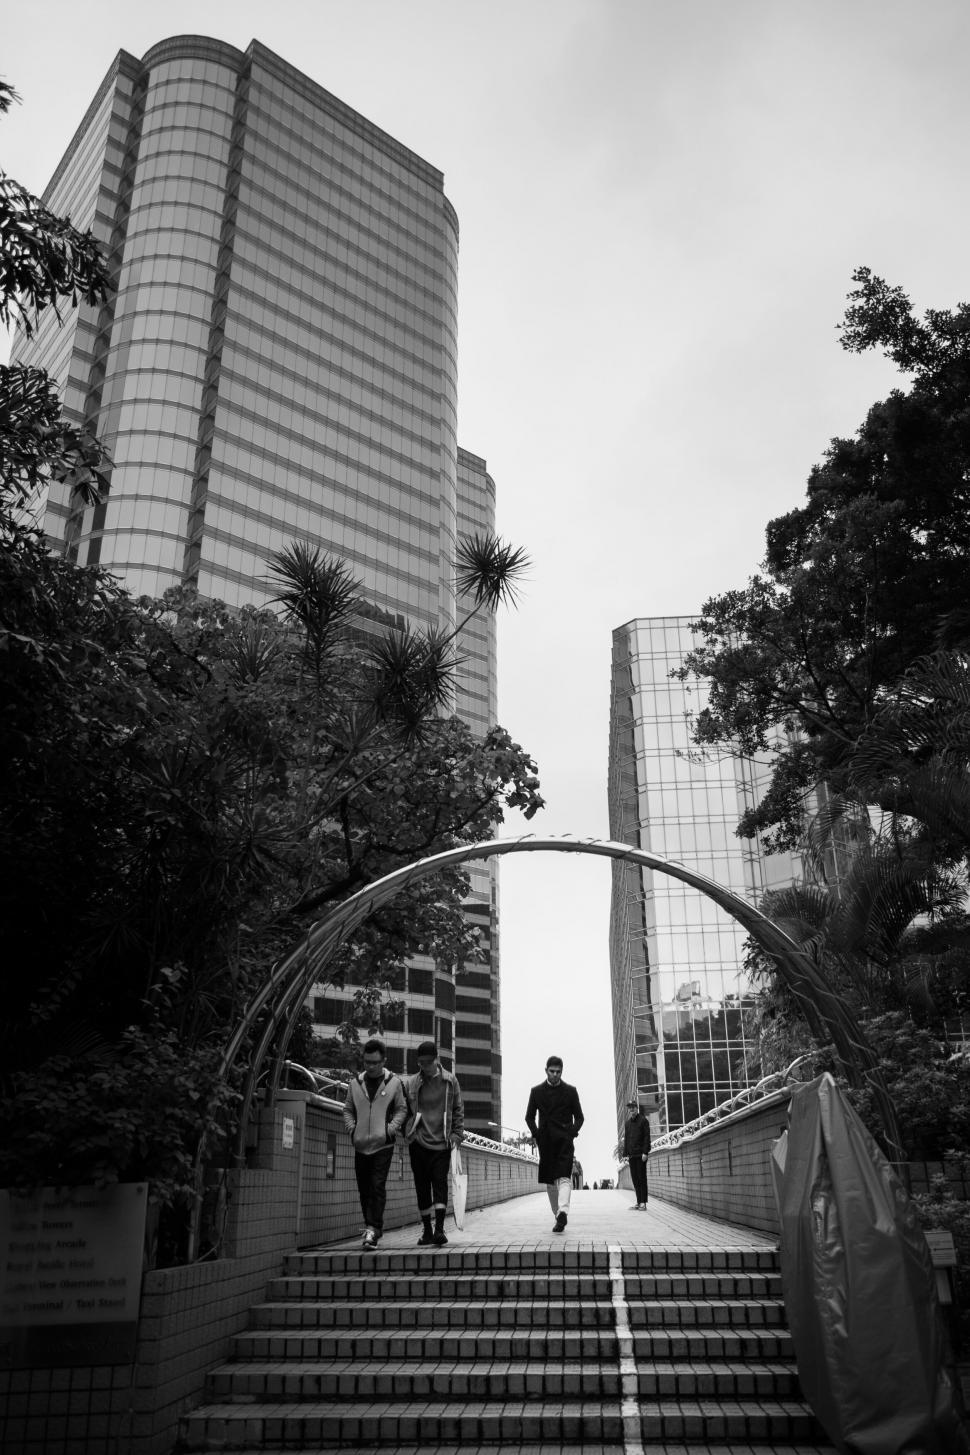 Free Image of Cityscape through circular archway 